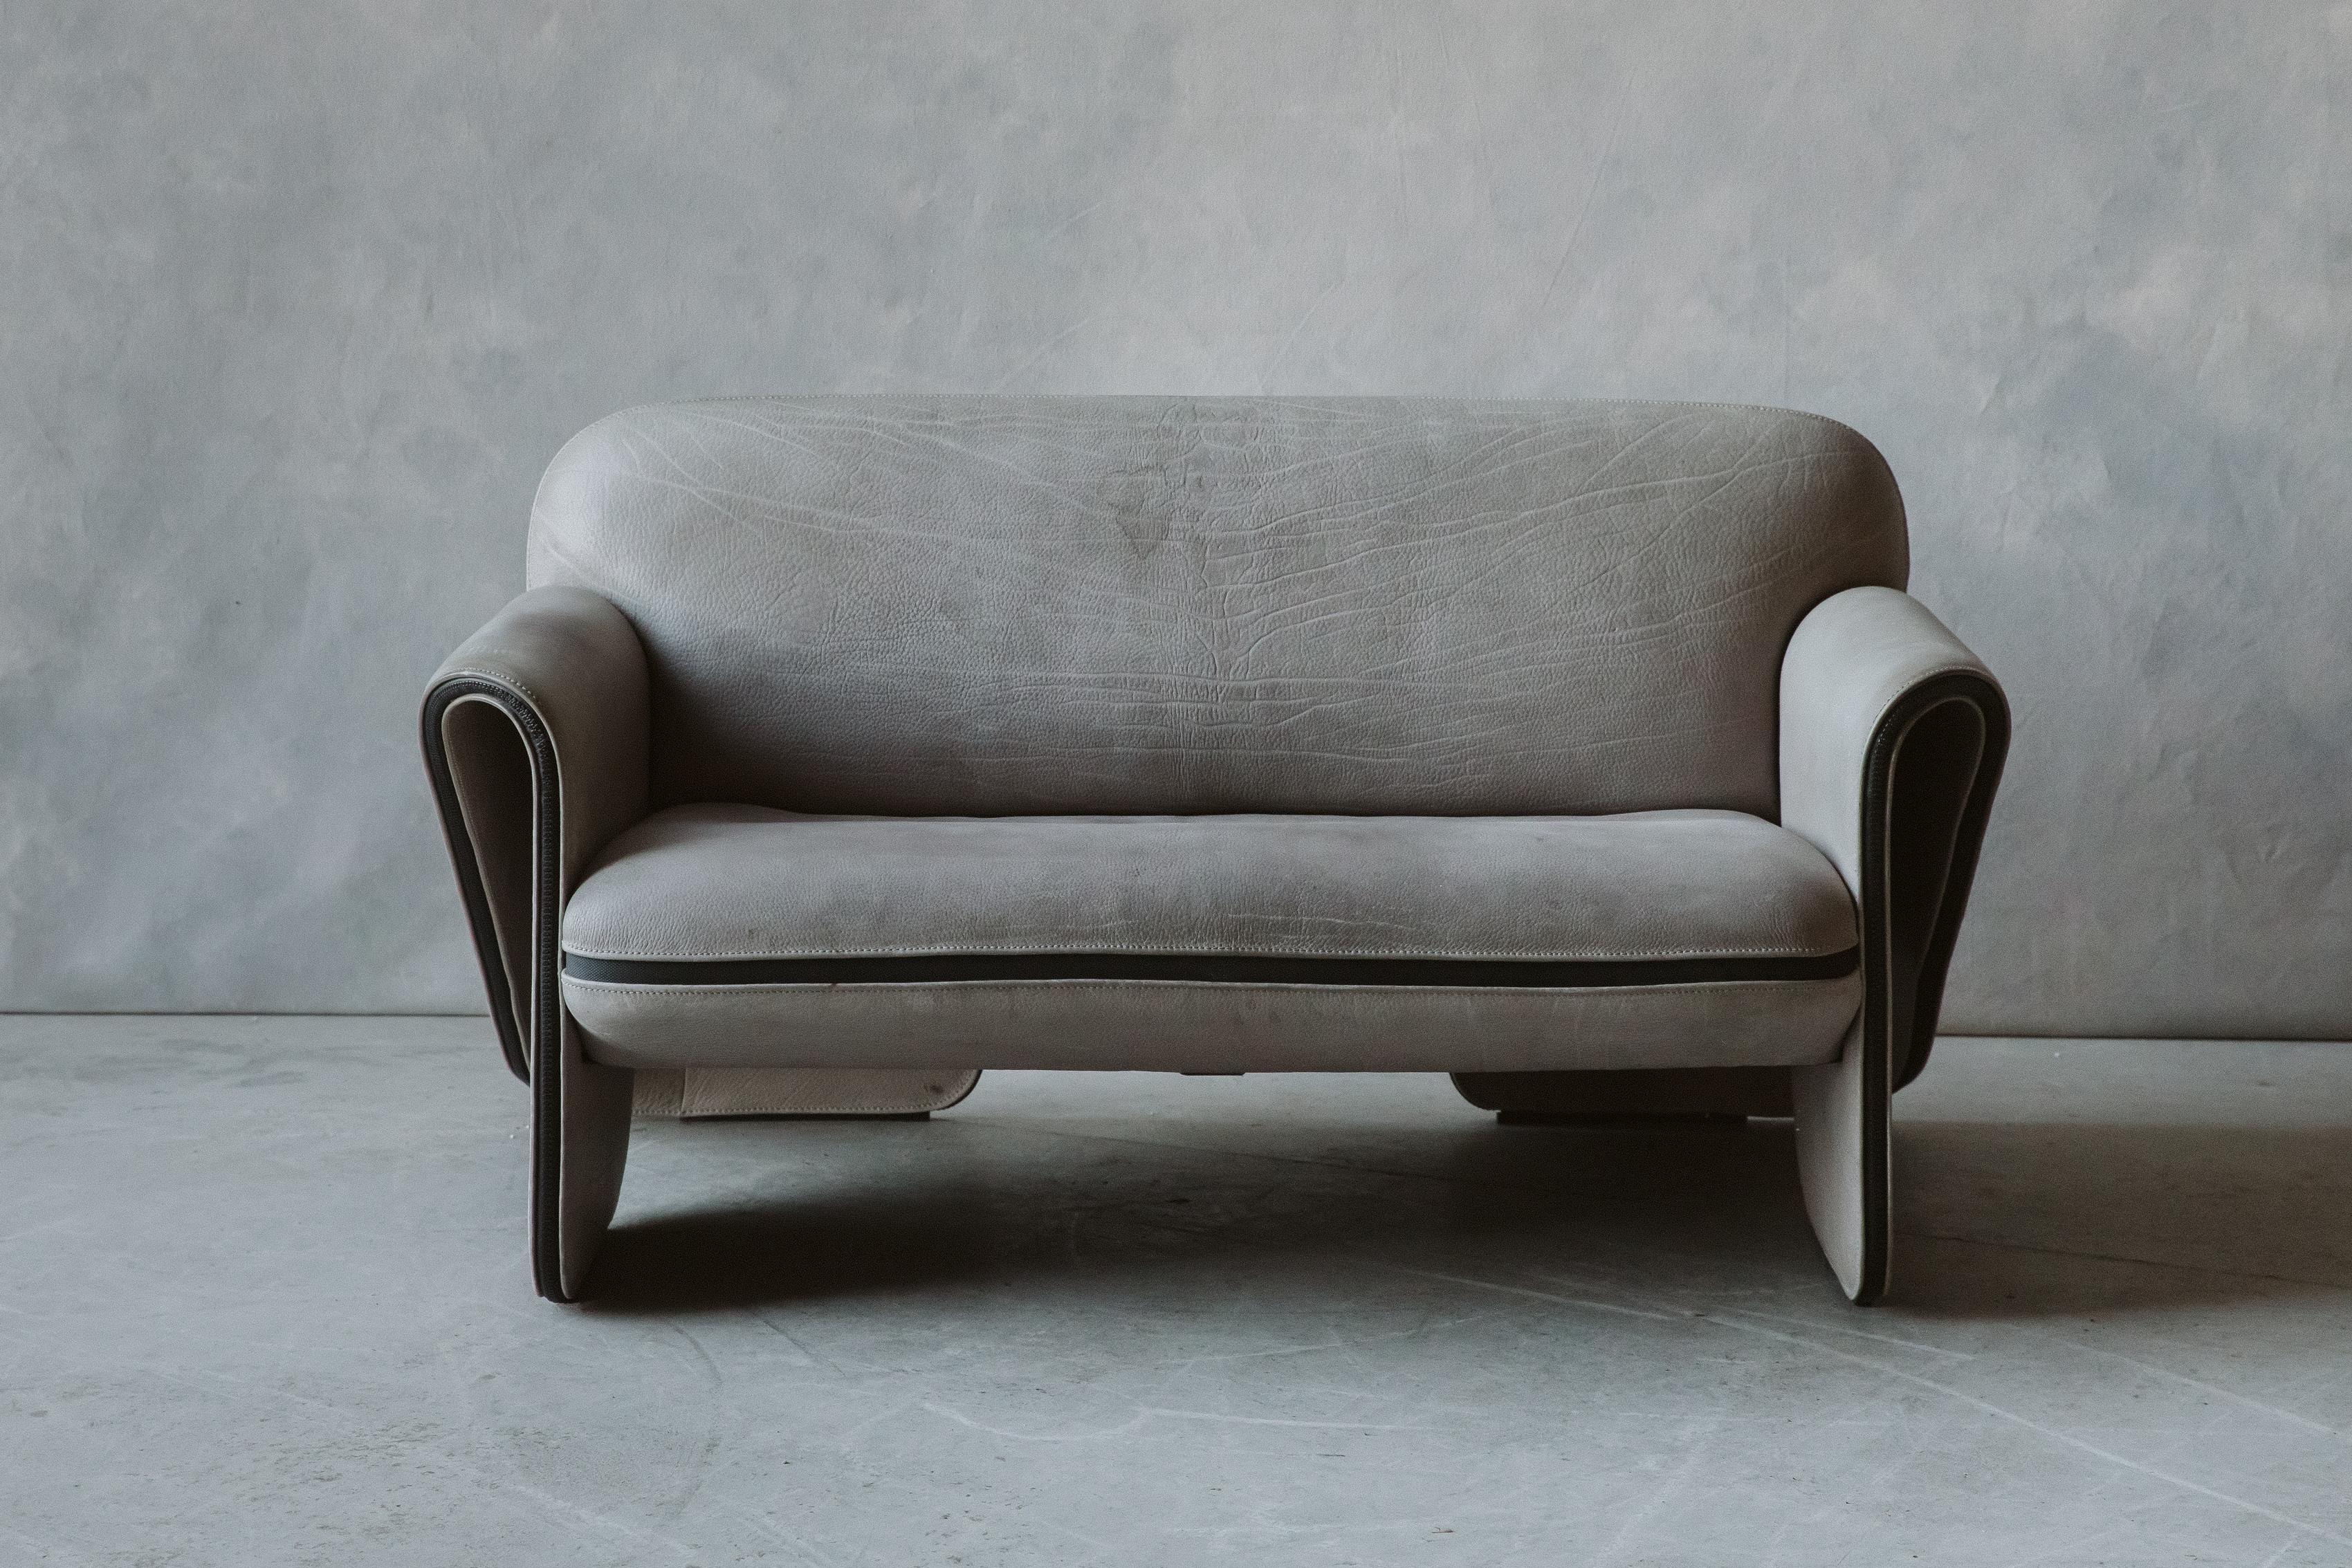 Vintage Leather De Sede Sofa Model DS 125, Switzerland, circa 1970. Original grey leather with nice wear and use. 

We prefer to speak directly with our clients. So, If you have any questions or would like to know more please give us a call or